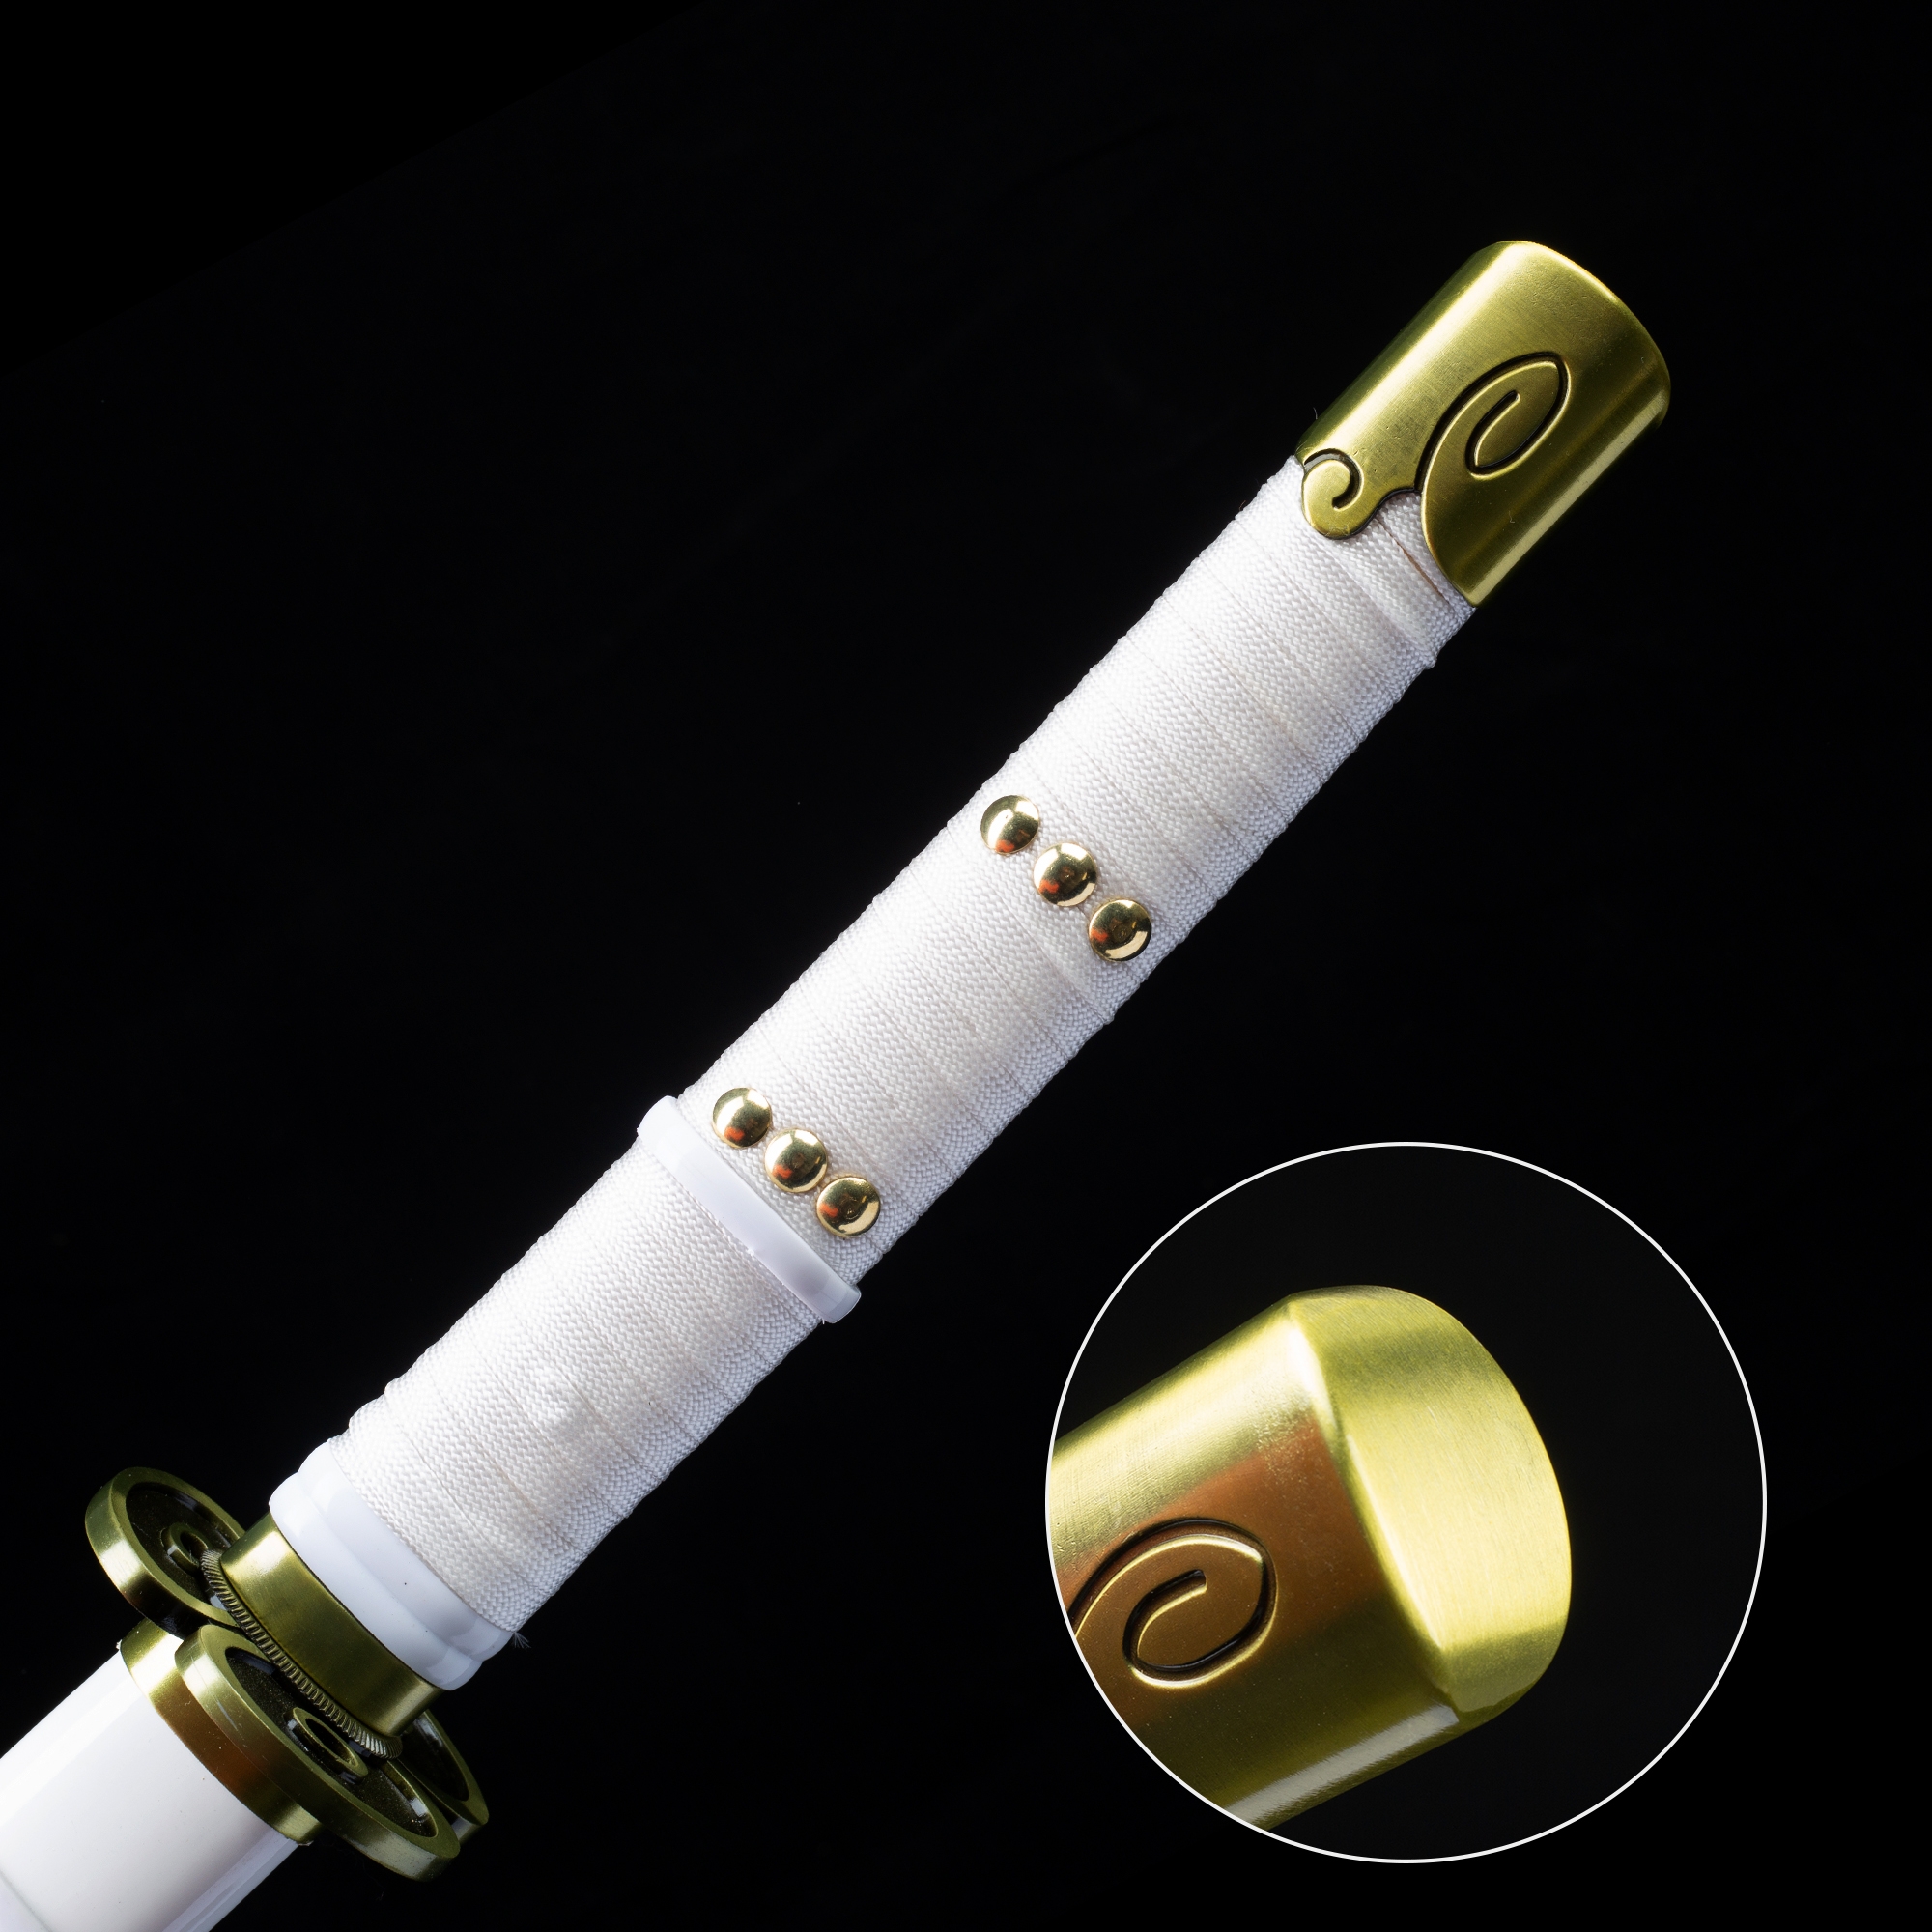 White Ame No Habakiri Enma Sword of Roronoa Zoro in $88 (Japanese Steel is  also Available) from One Piece Swords| Japanese Samurai Sword | Type III